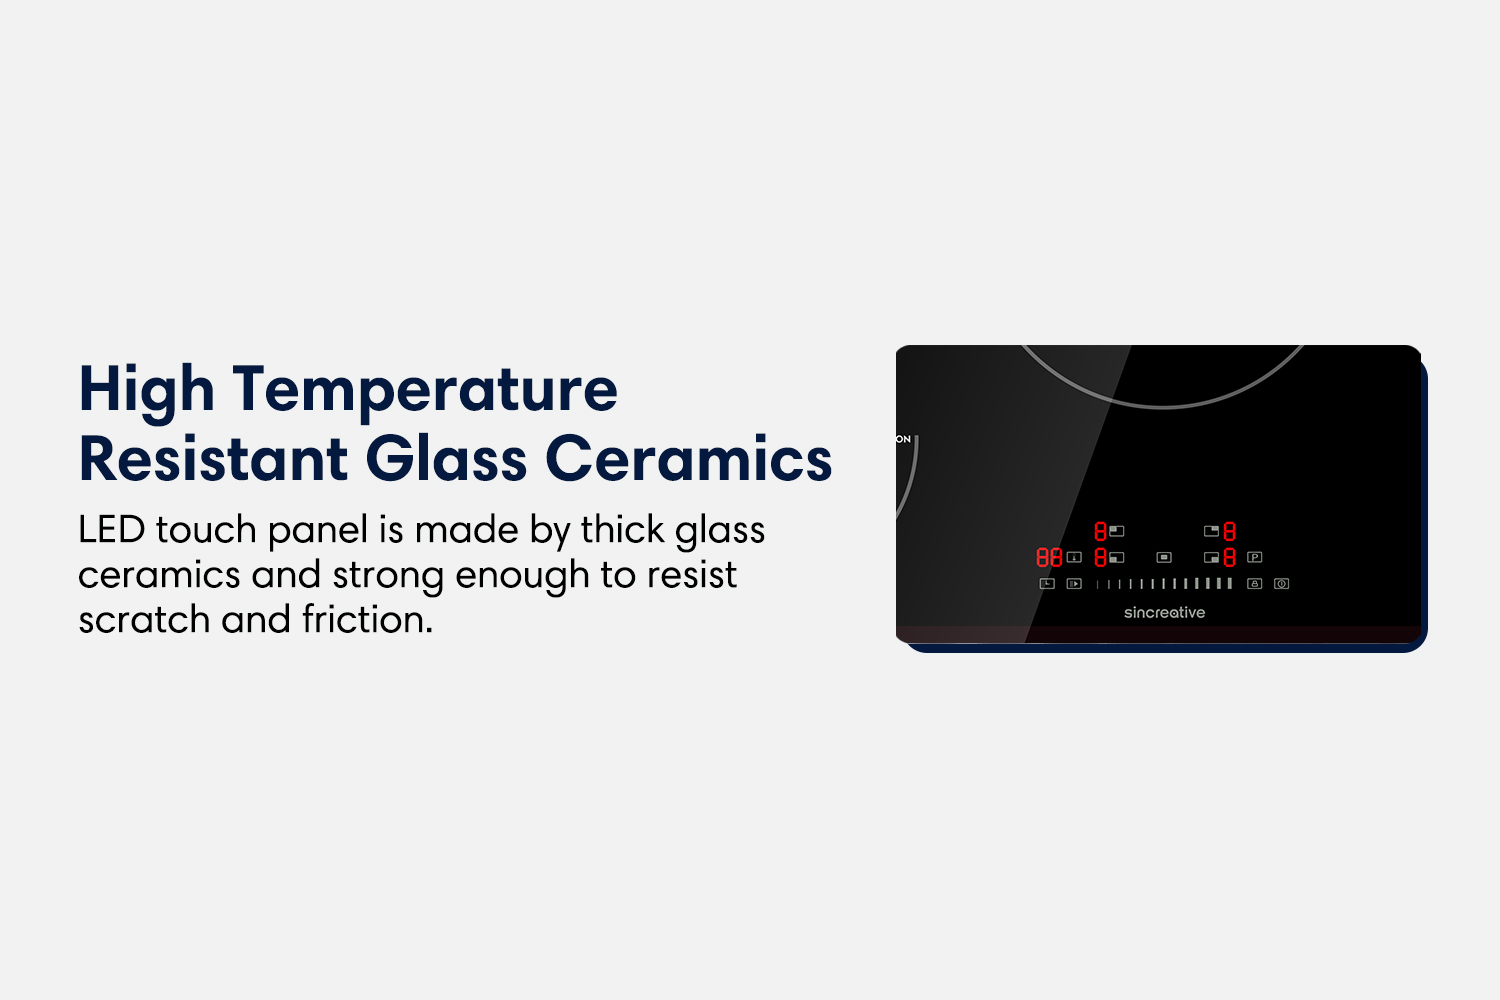 High temperature resistant glass ceramics LEDtouch panel is made by thick glass ceramics and strong enough to resist scratch and friction